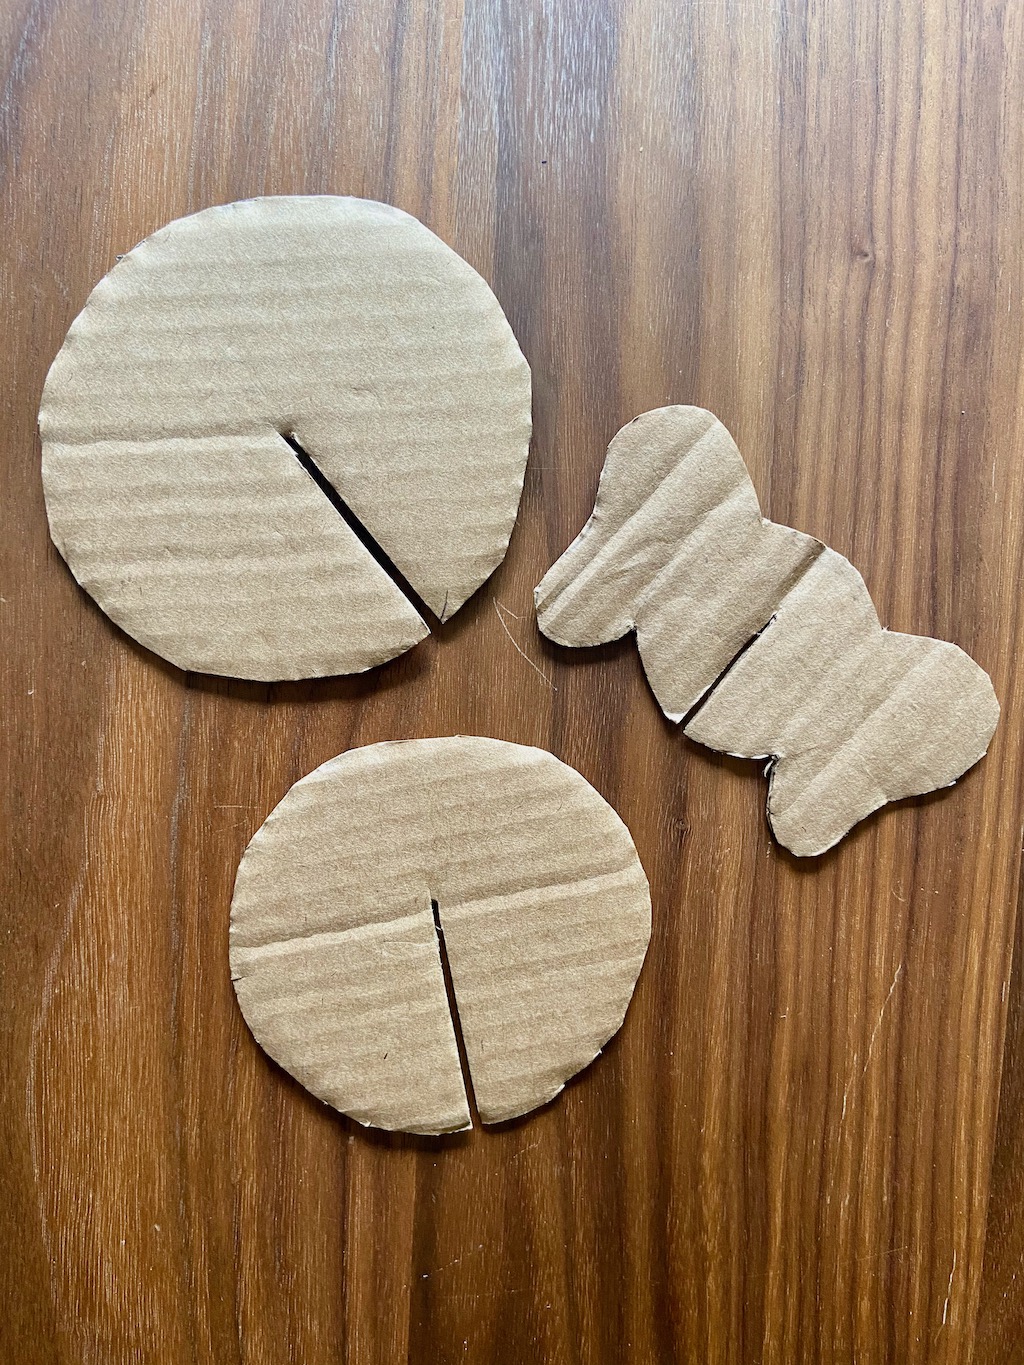 Cut all of these shapes out of the clean cardboard. You will have: 2 body circles, 1 head (with ears!)